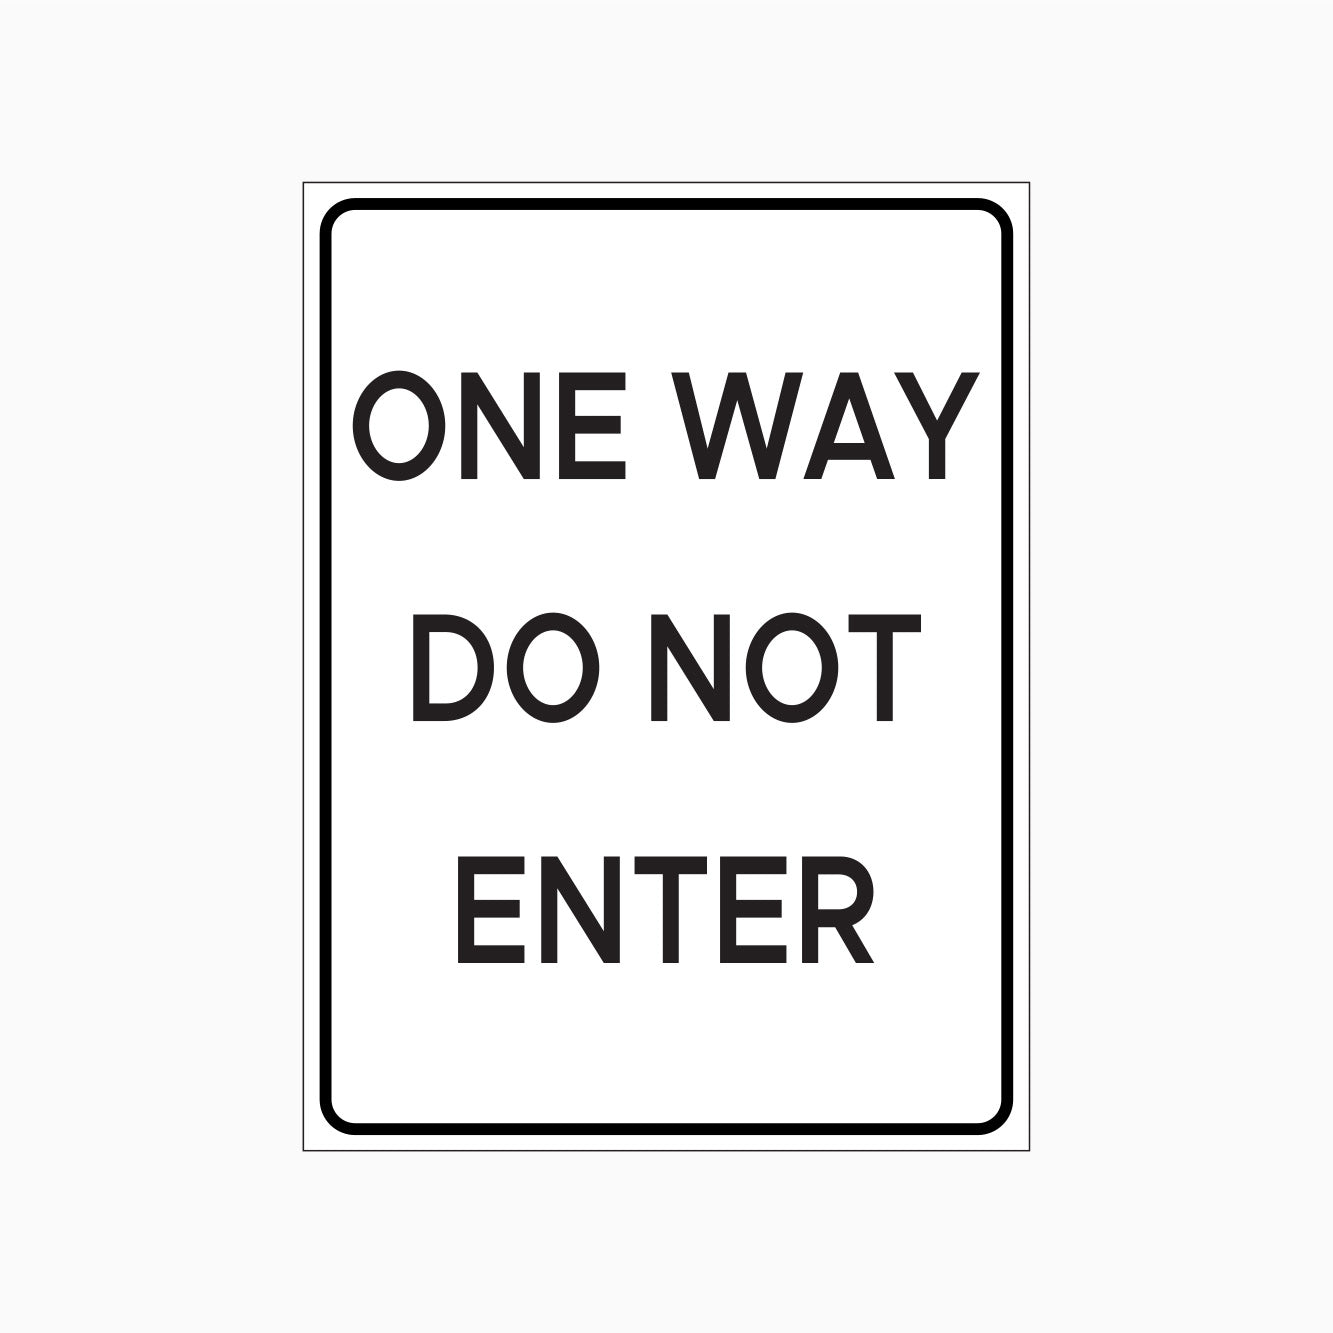 ONE WAY DO NOT ENTER SIGN - ROAD AND TRAFFIC SIGNS